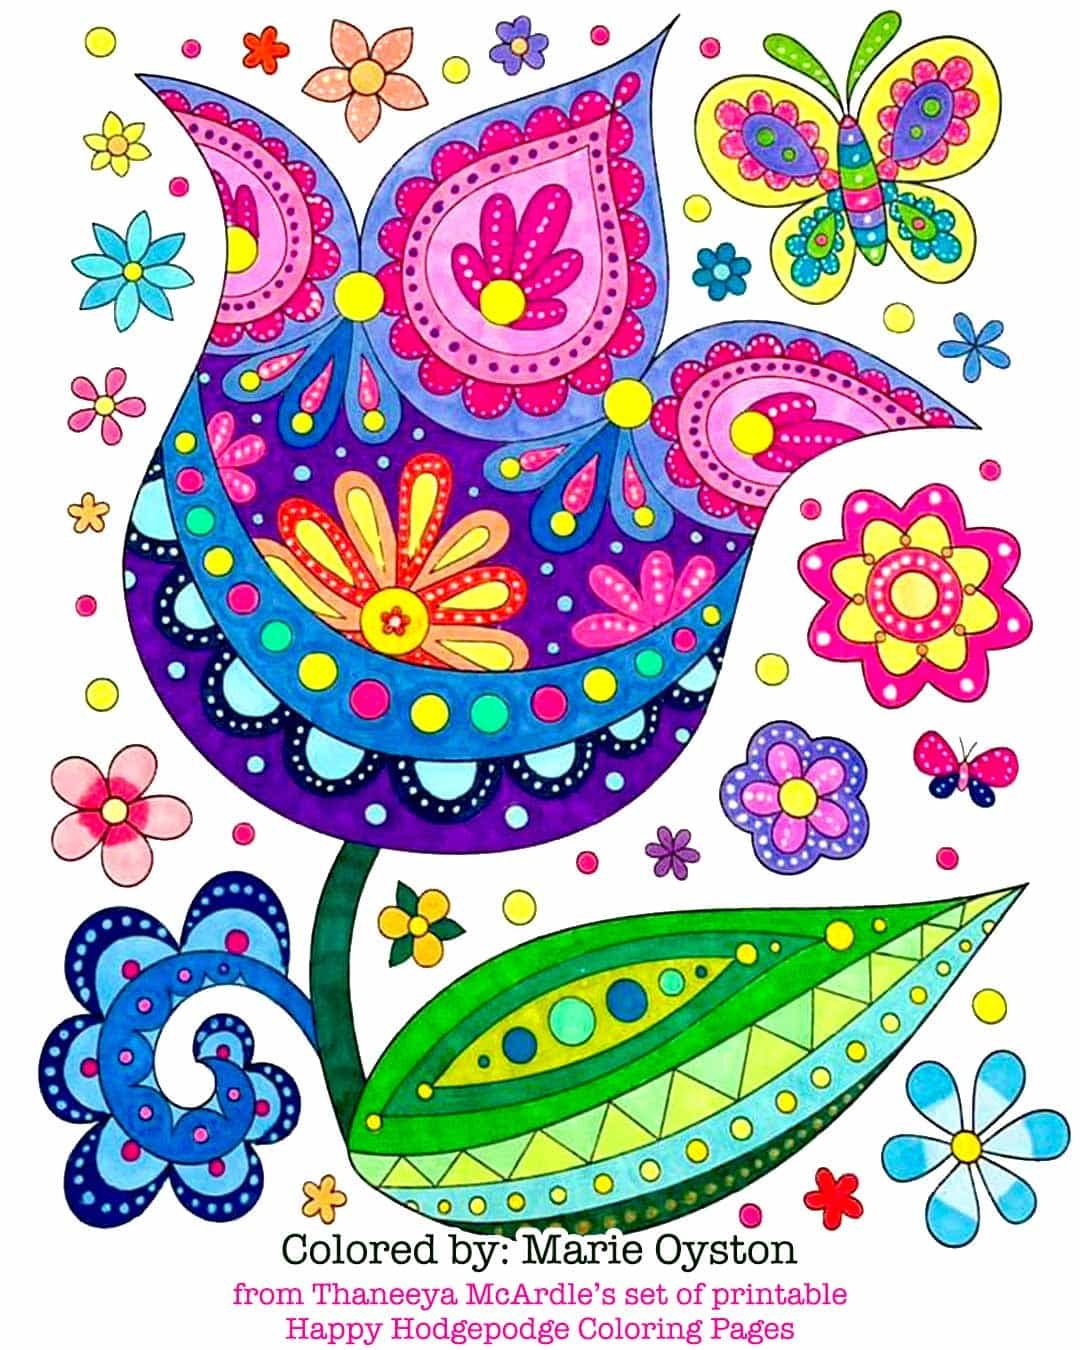 Groovy tulip coloring page from Thaneeya McArdle's set of printable Happy Hodgepodge Coloring Pages